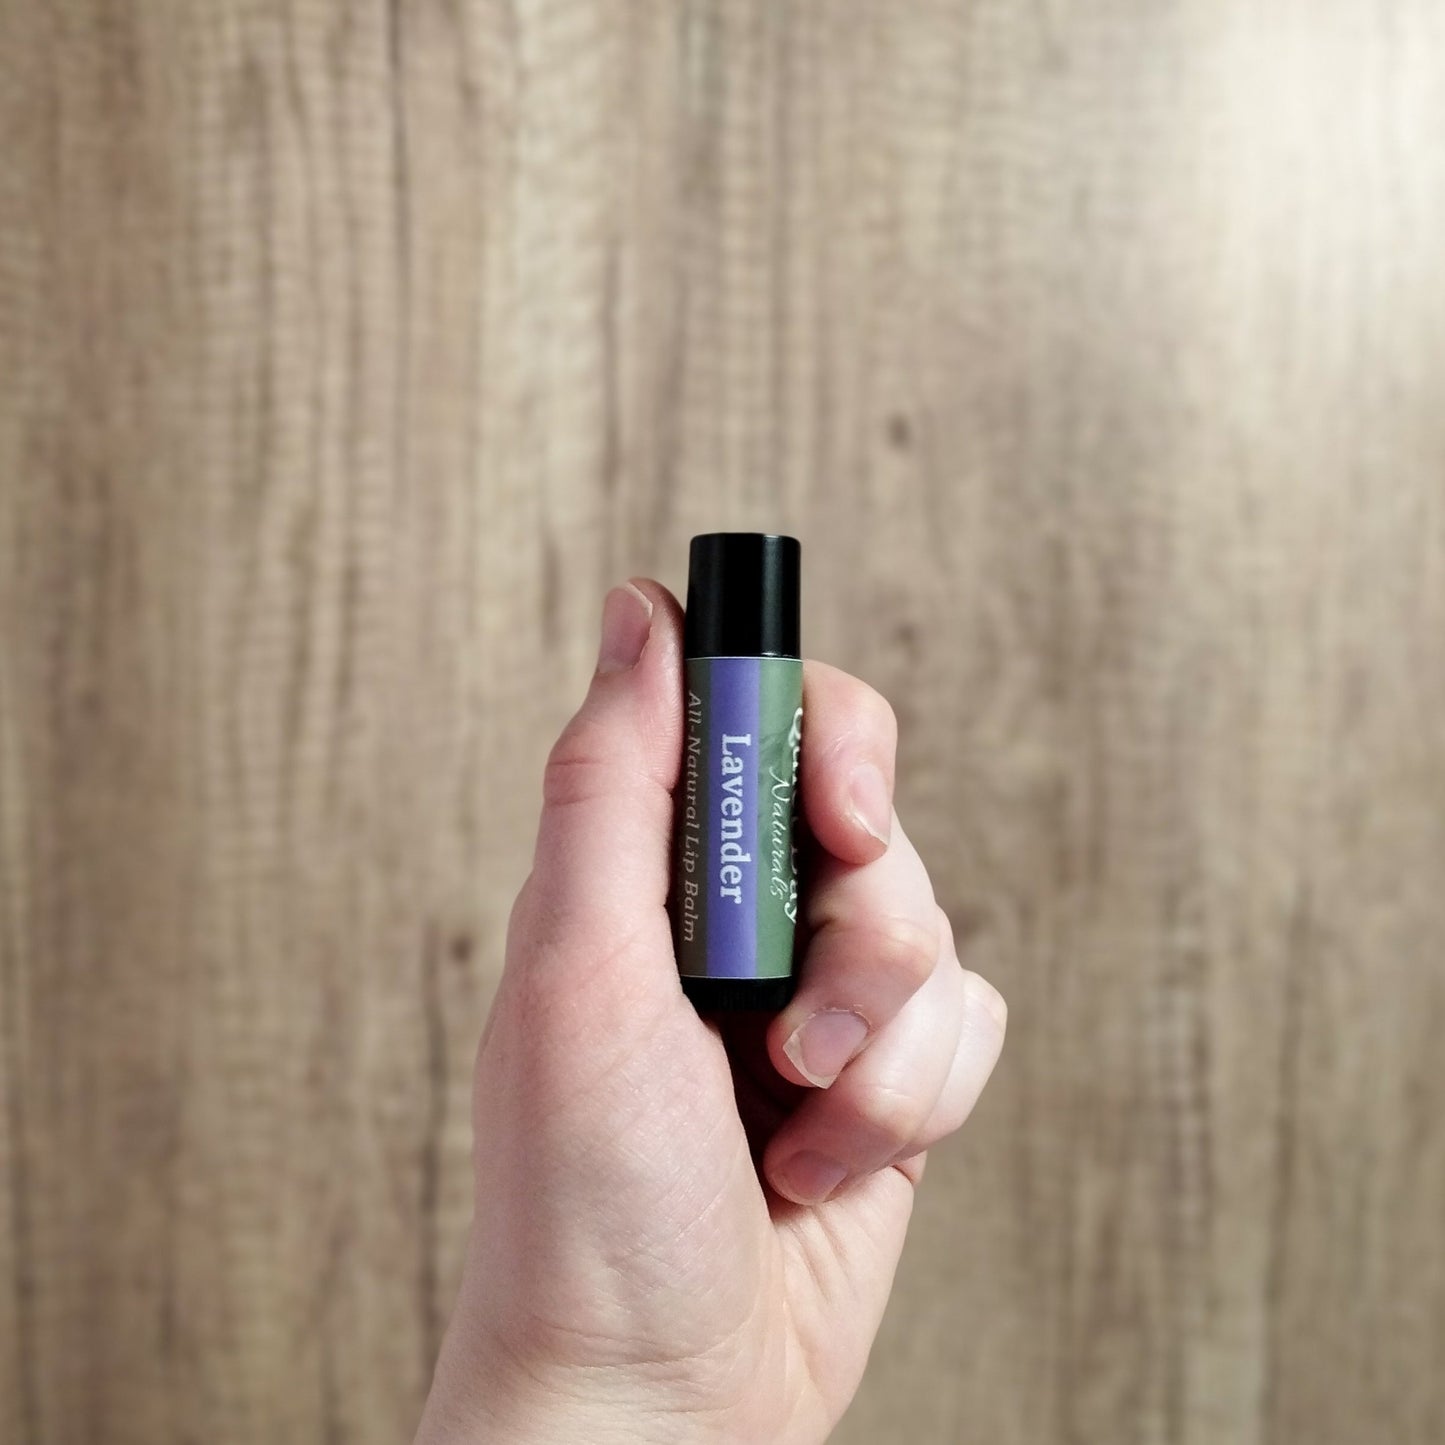 Paraben free lip balm being held in hand to show size.